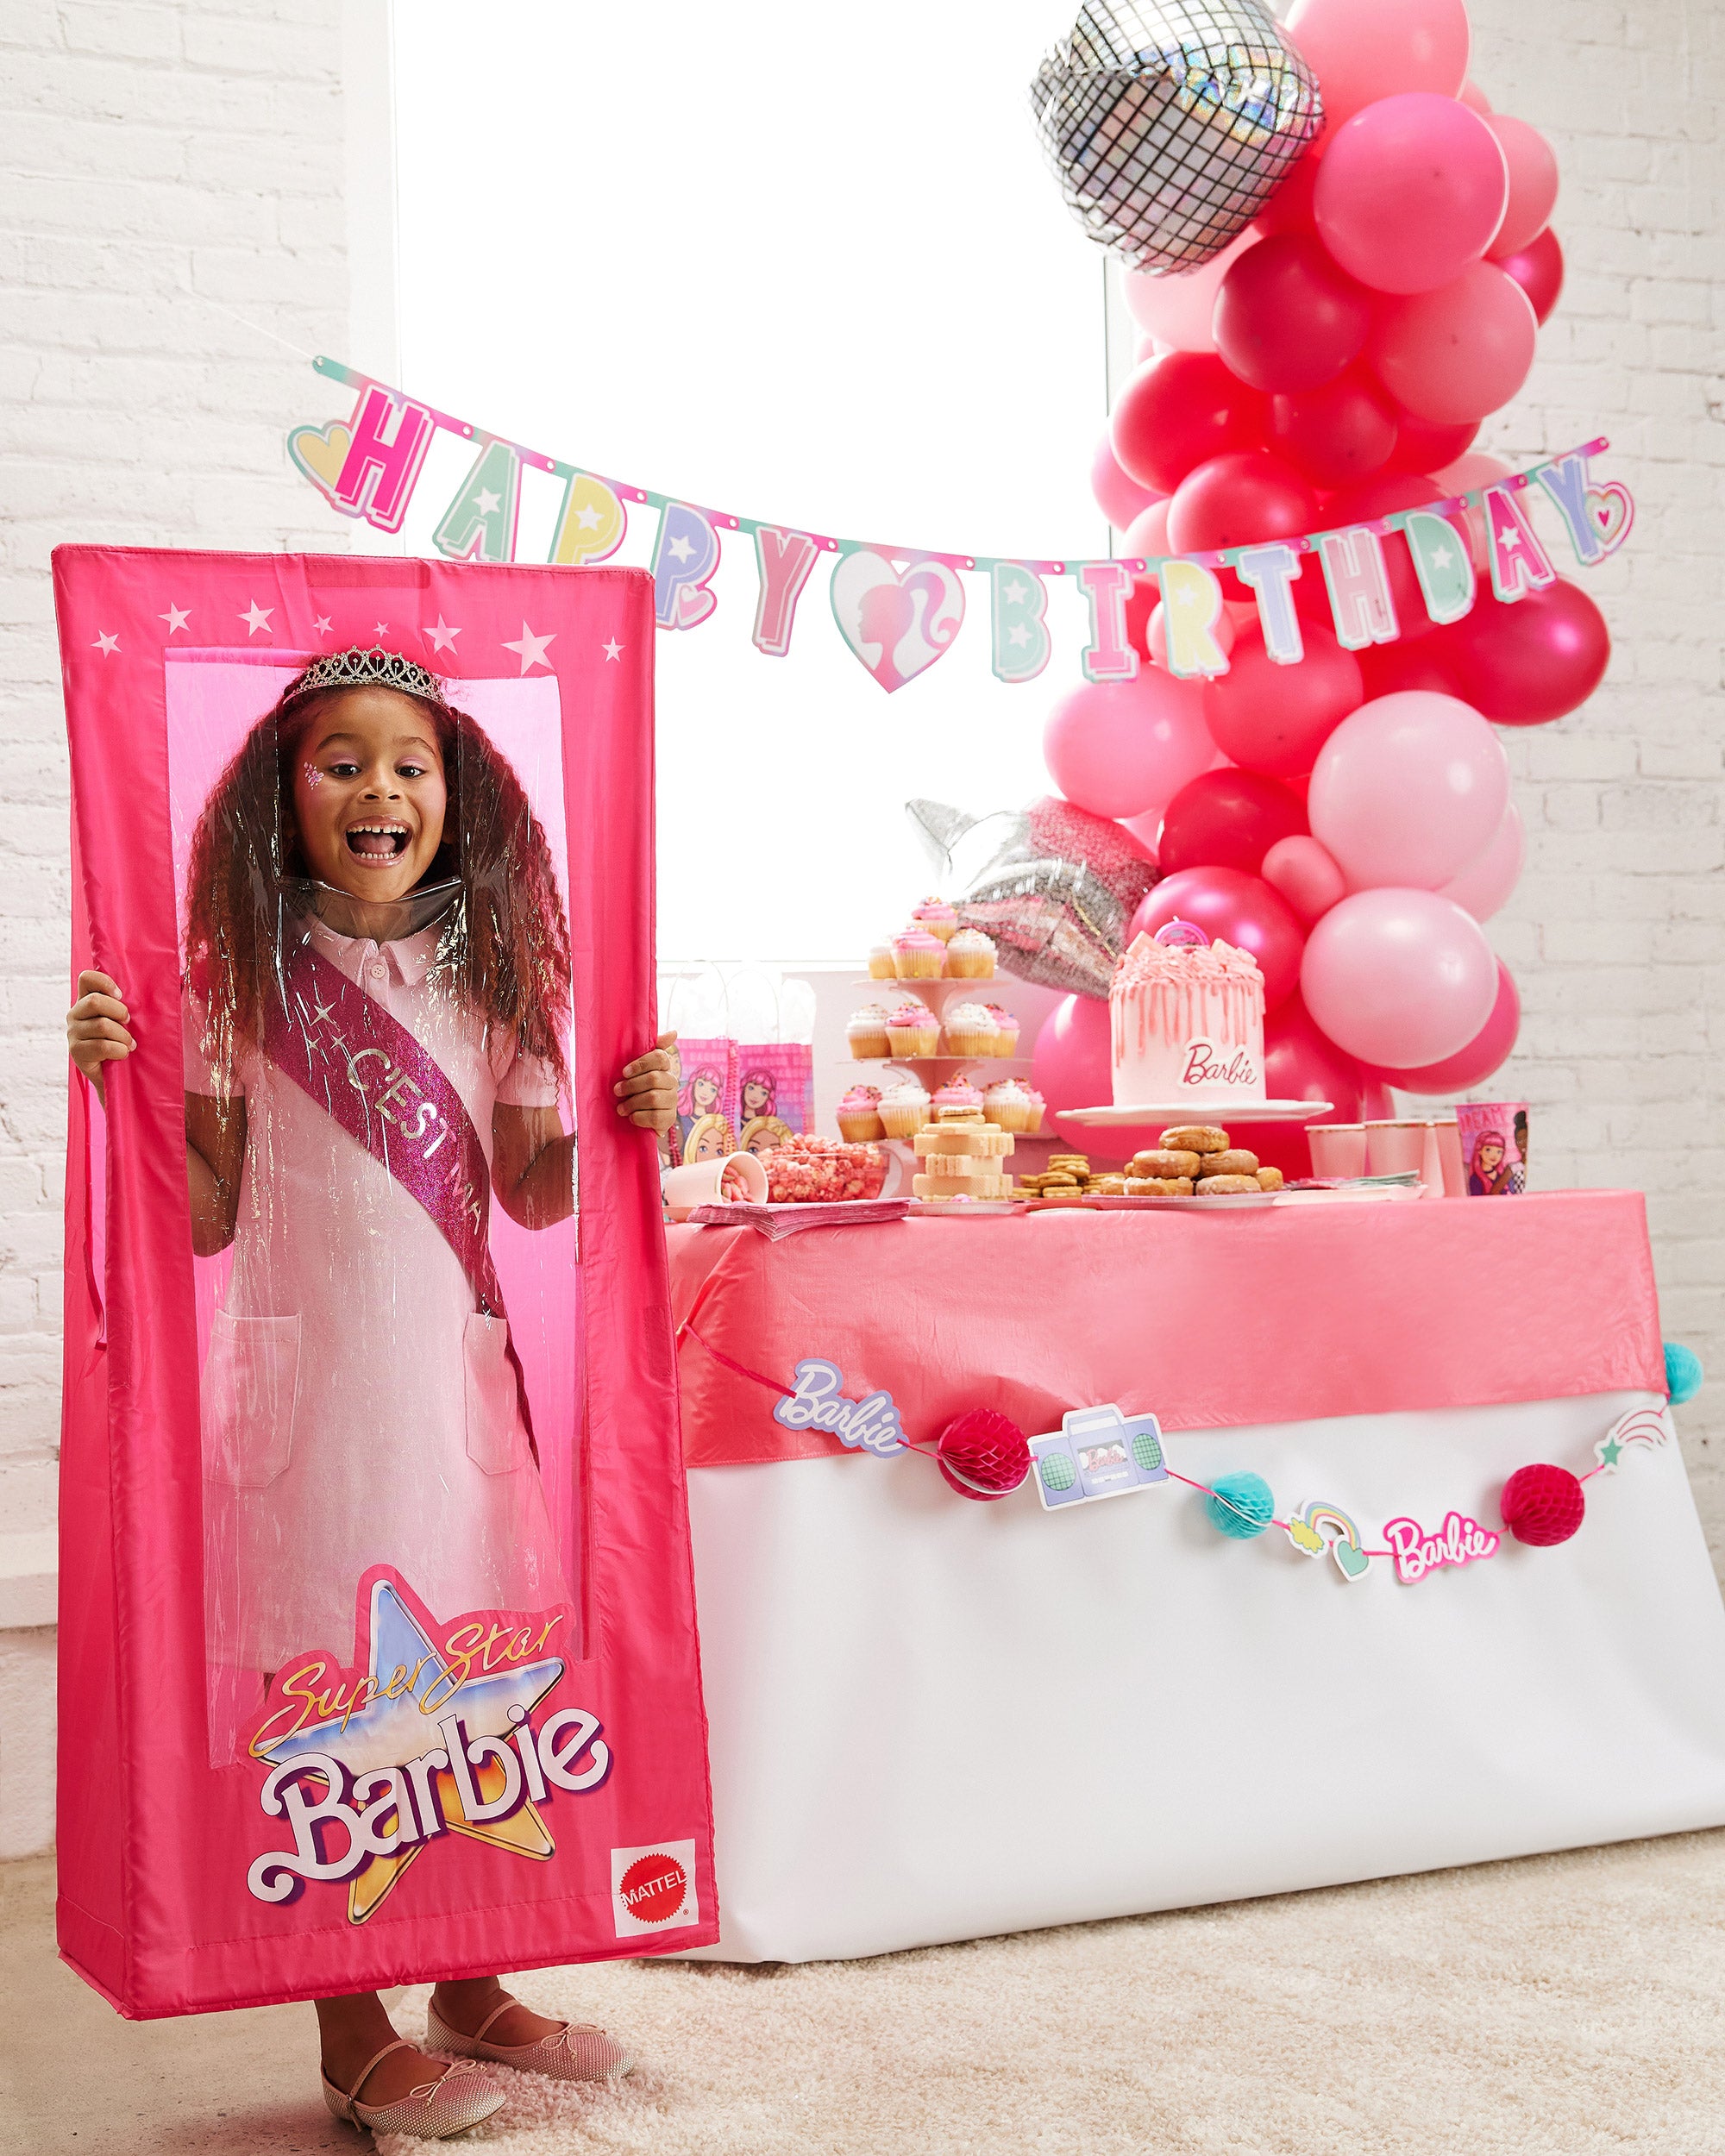 Barbie Bash: Planning the Ultimate Barbie Party插图4